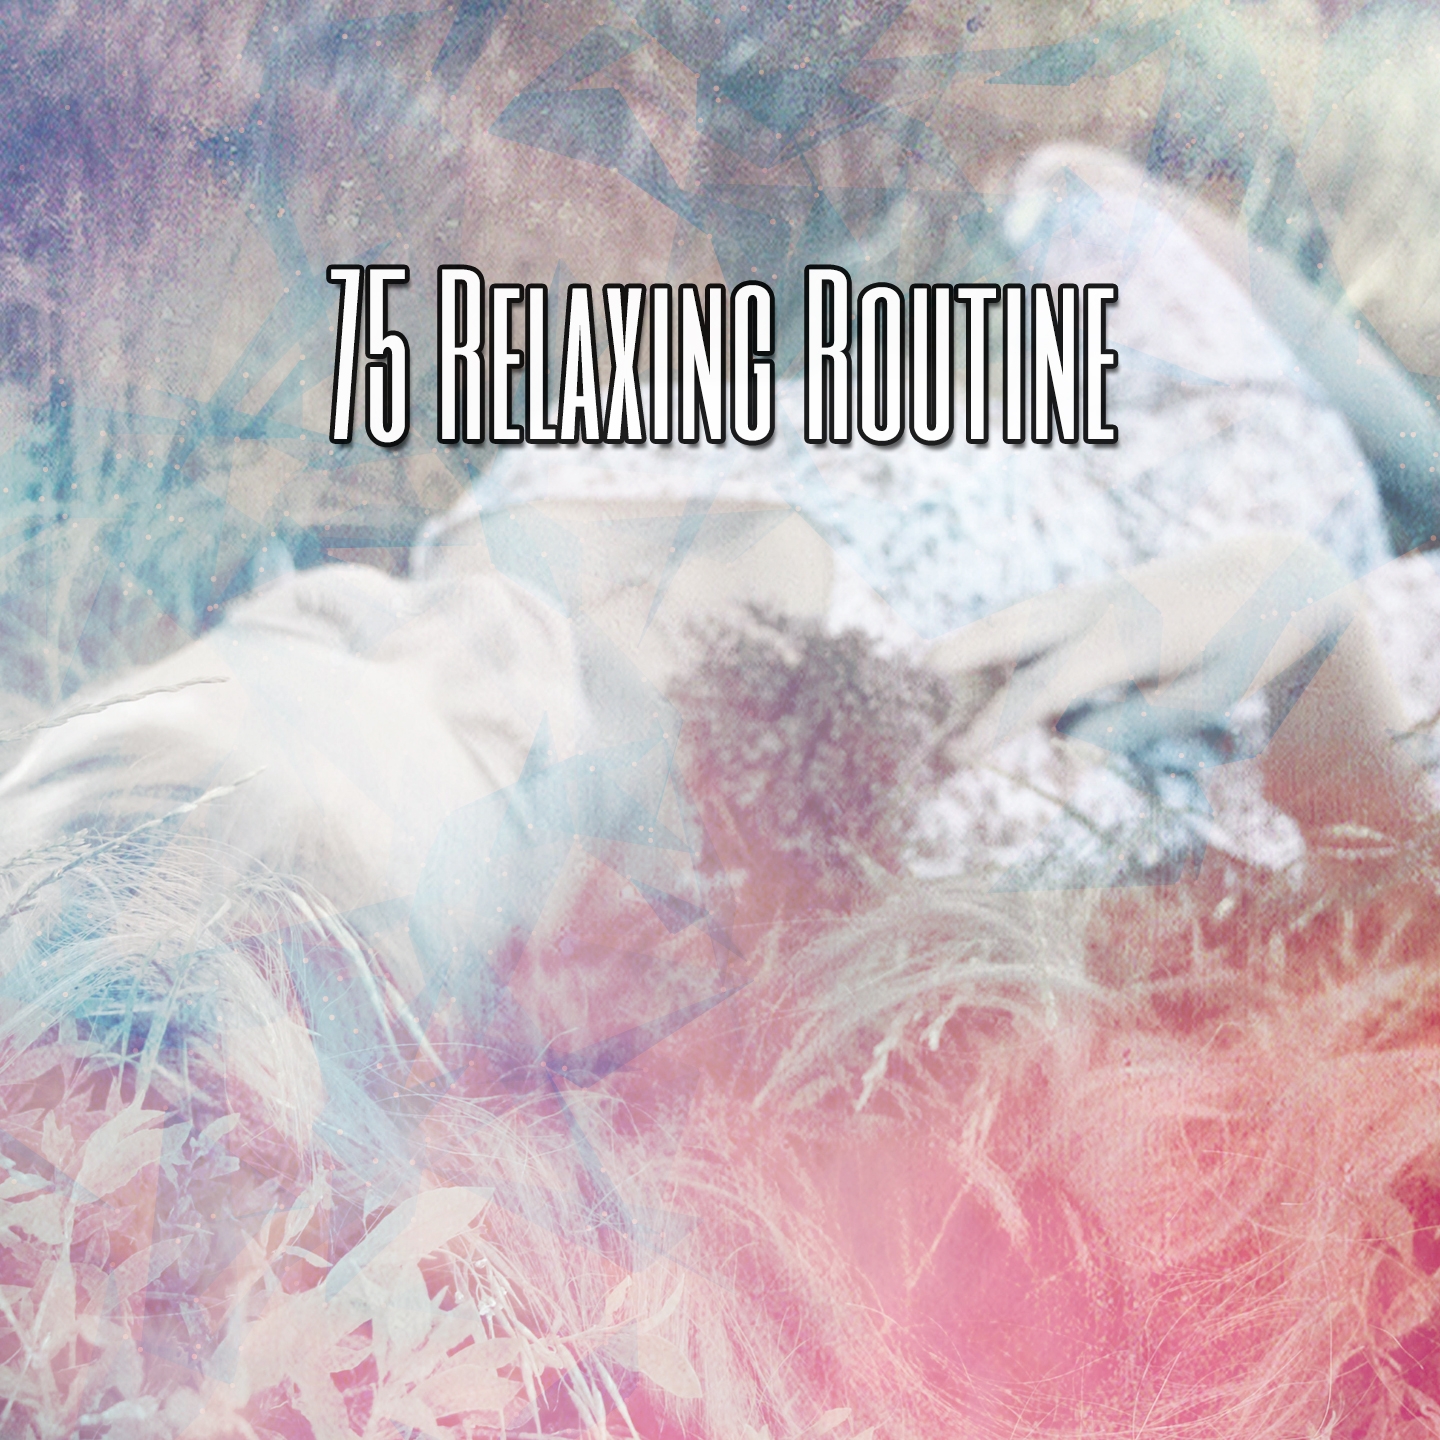 75 Relaxing Routine